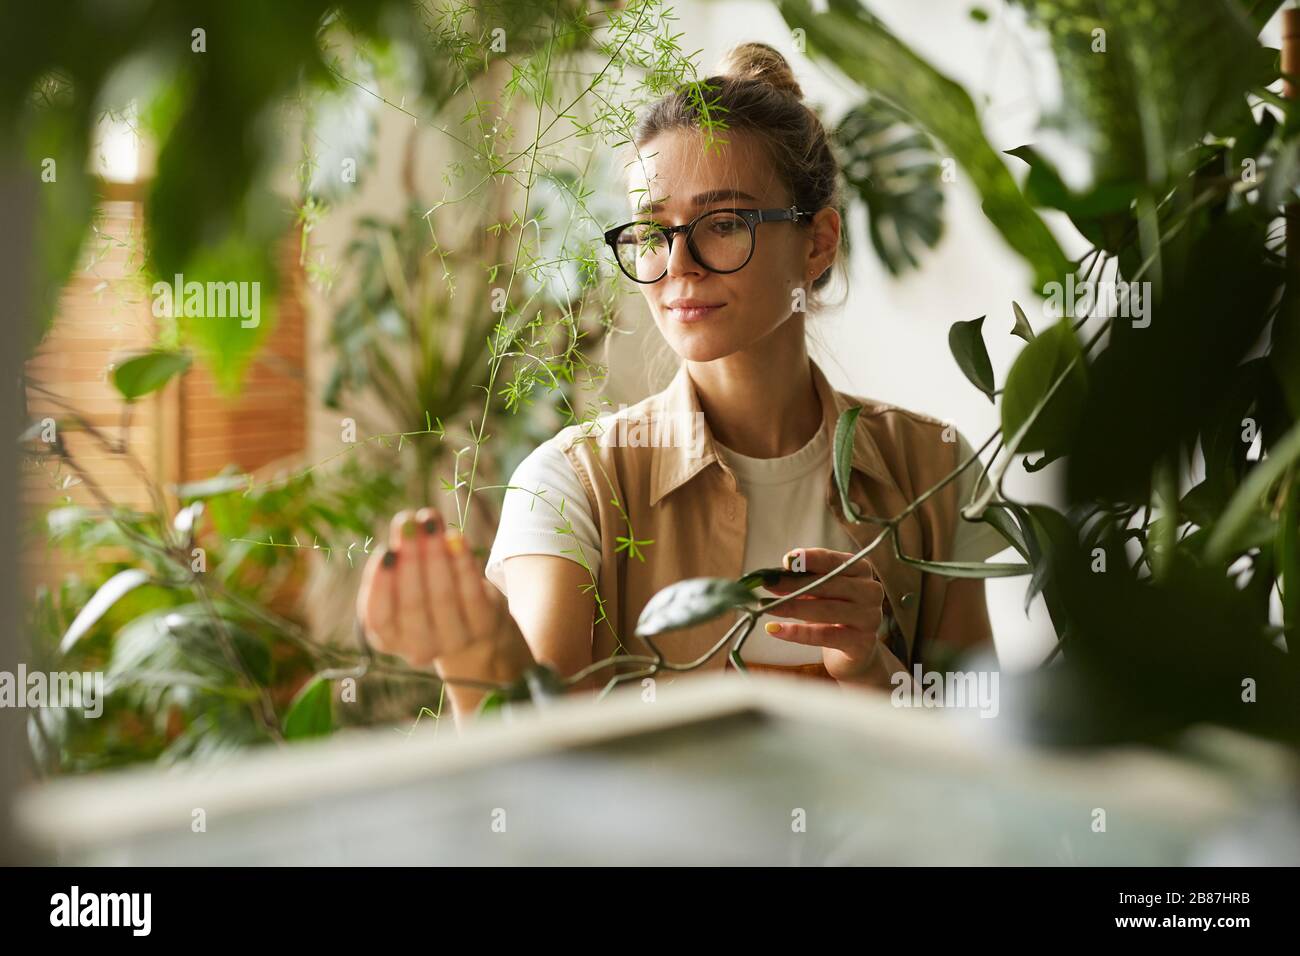 Young botanist in eyeglasses holding branch of decorative plant in her hand and examining it Stock Photo